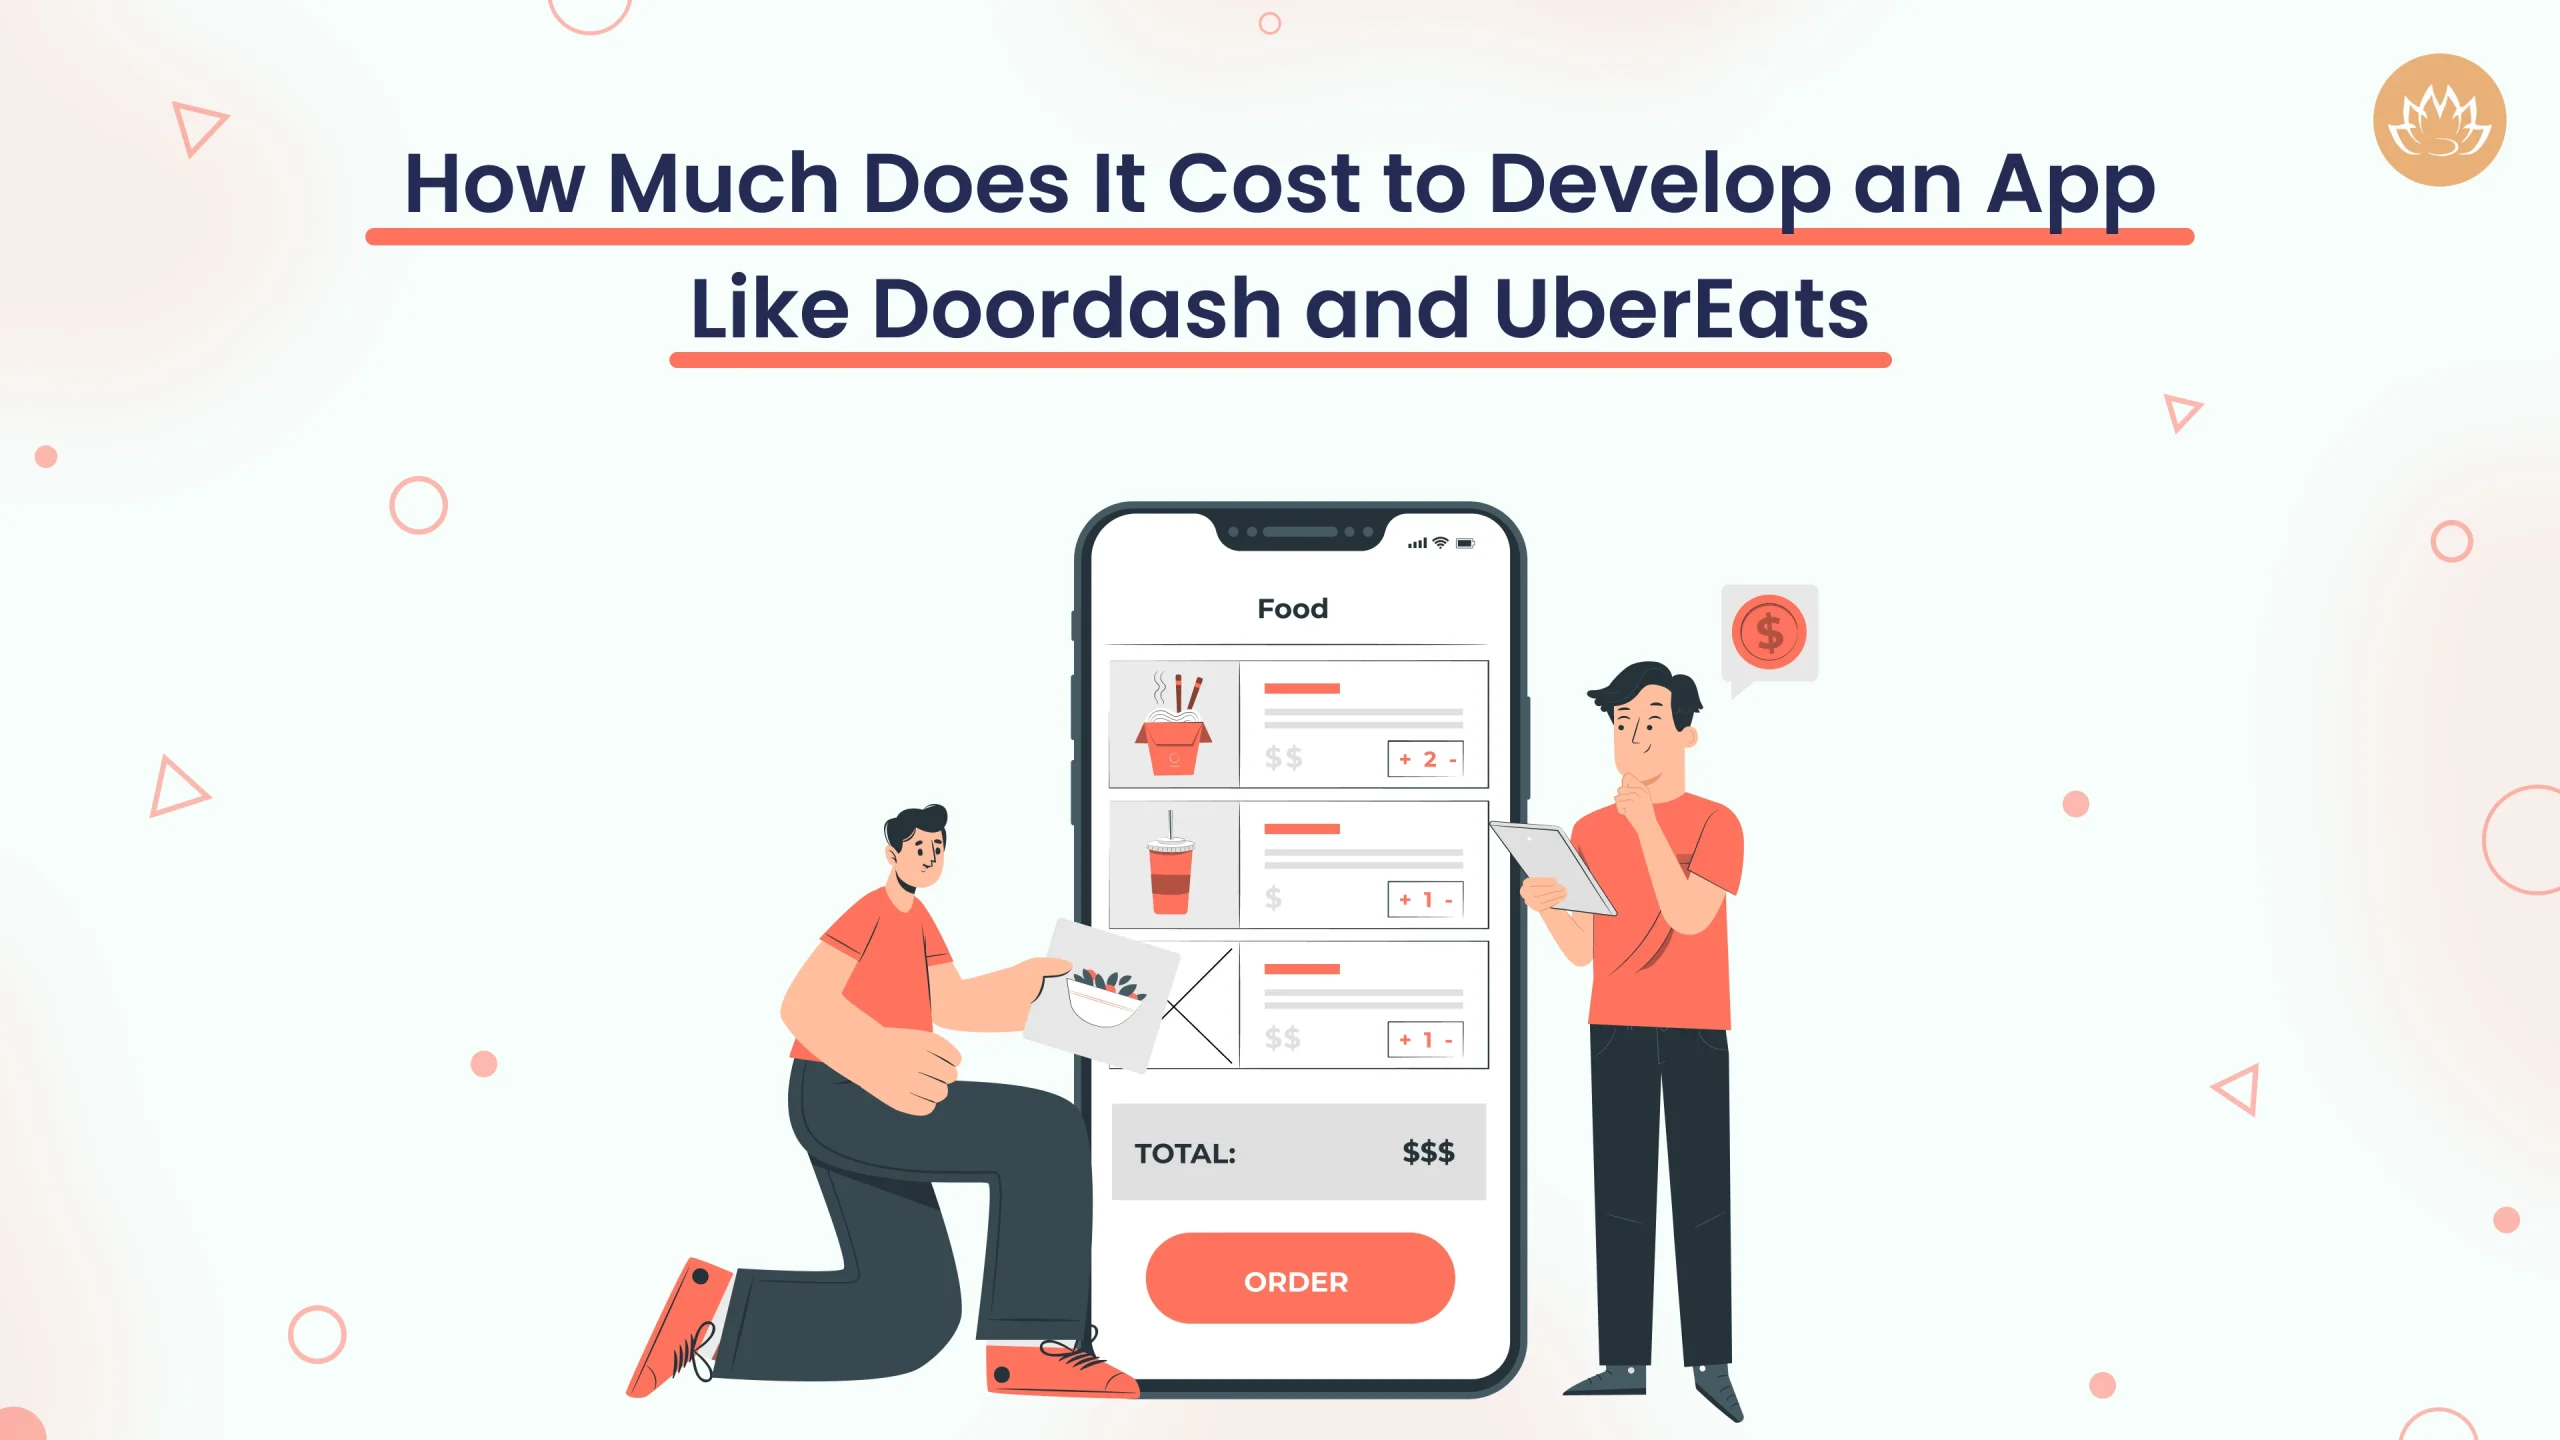 Bringing a New Level of Detail and Support to Your DoorDash Order, by  DoorDash